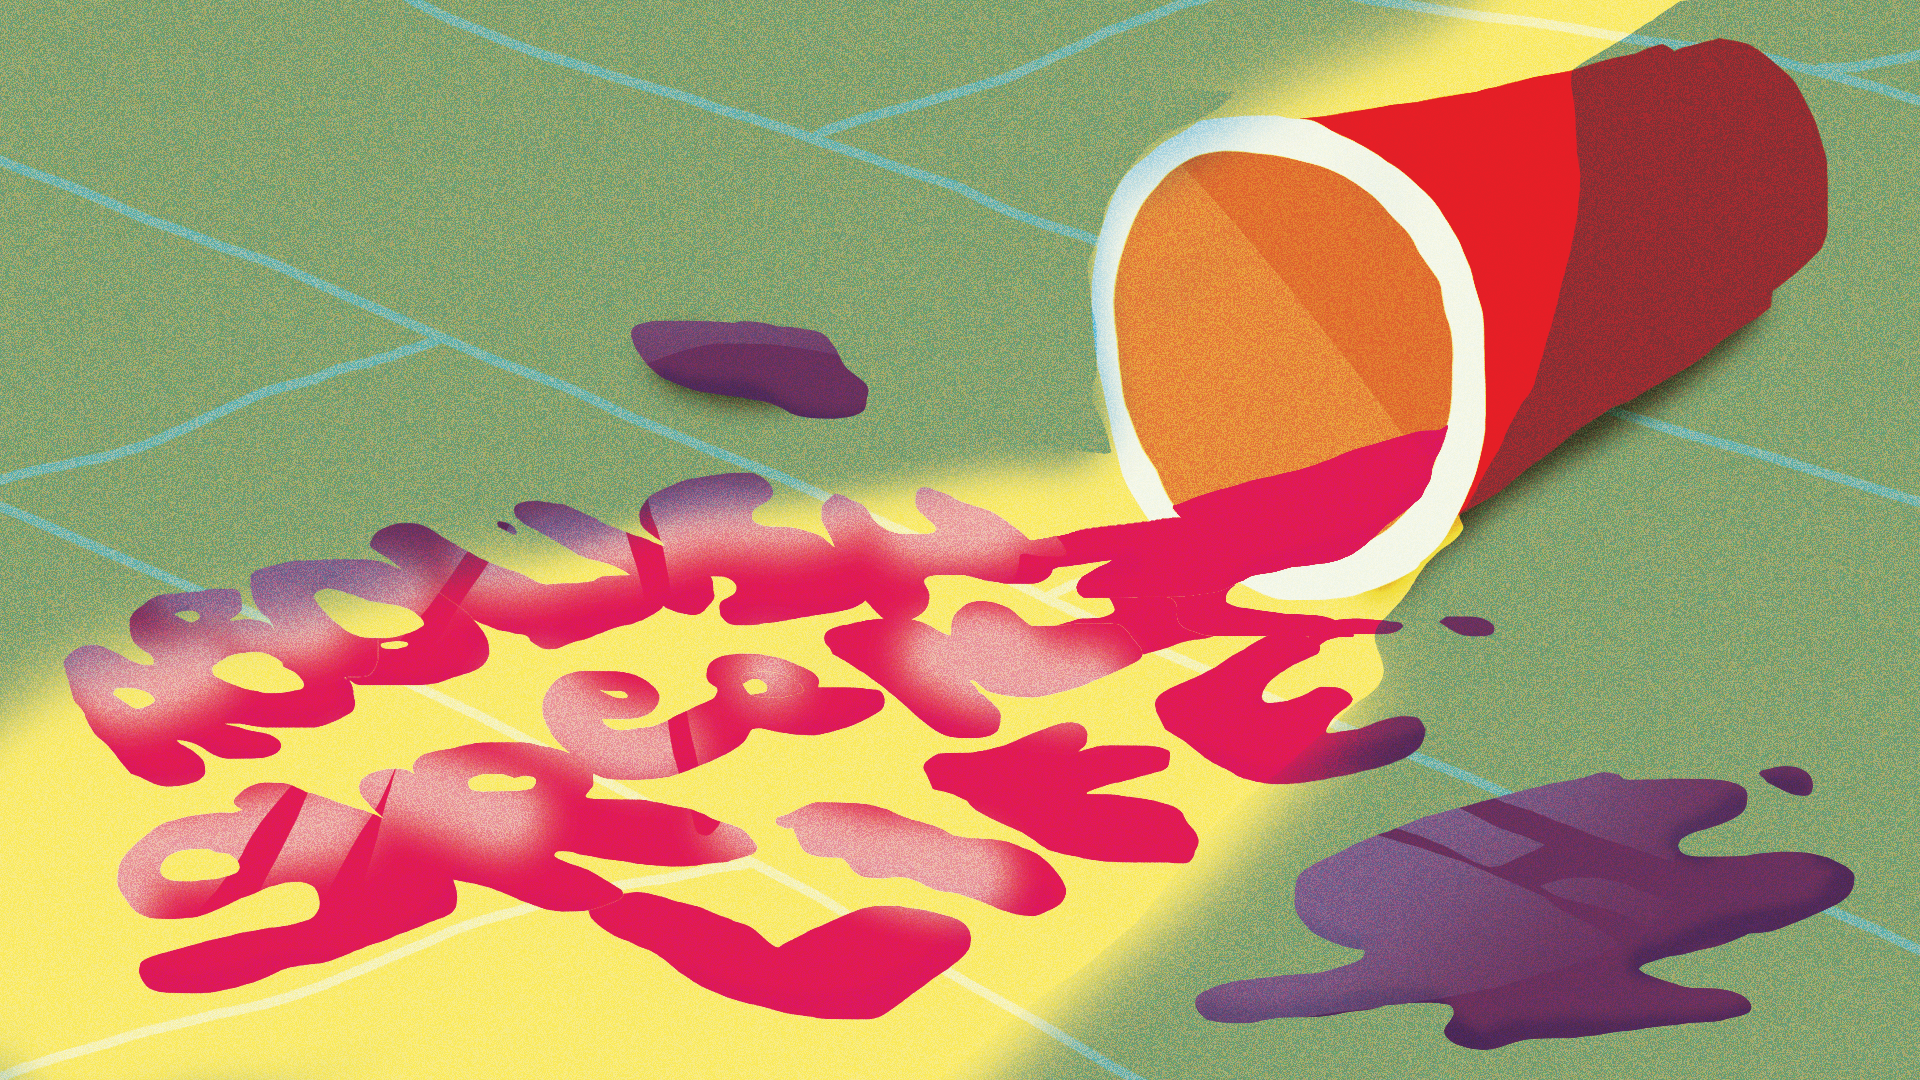 Image Description: Illustration of a red Solo cup tipped over on a yellow tiled floor. Liquid spilling from the cup forms the words “Abolish Greek Life.” Design by Lauren Cramer